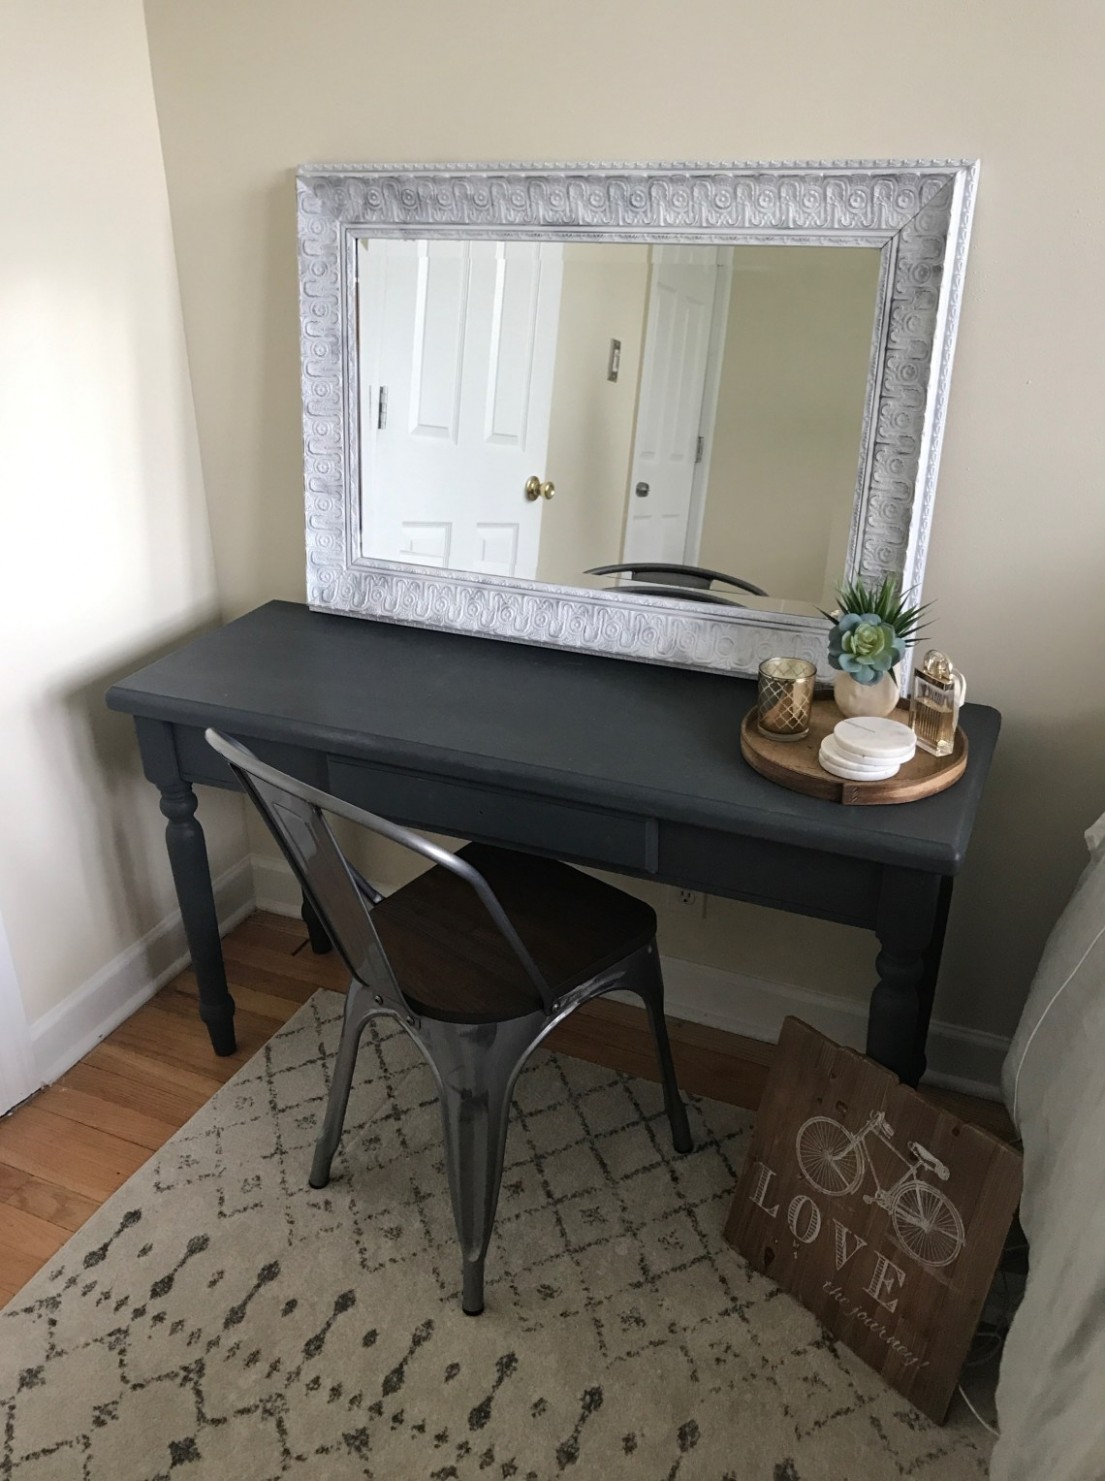 Diy Project: How To Chalk Paint A Mirror The Holtz House Can You Use Chalk Paint On Metal Furniture